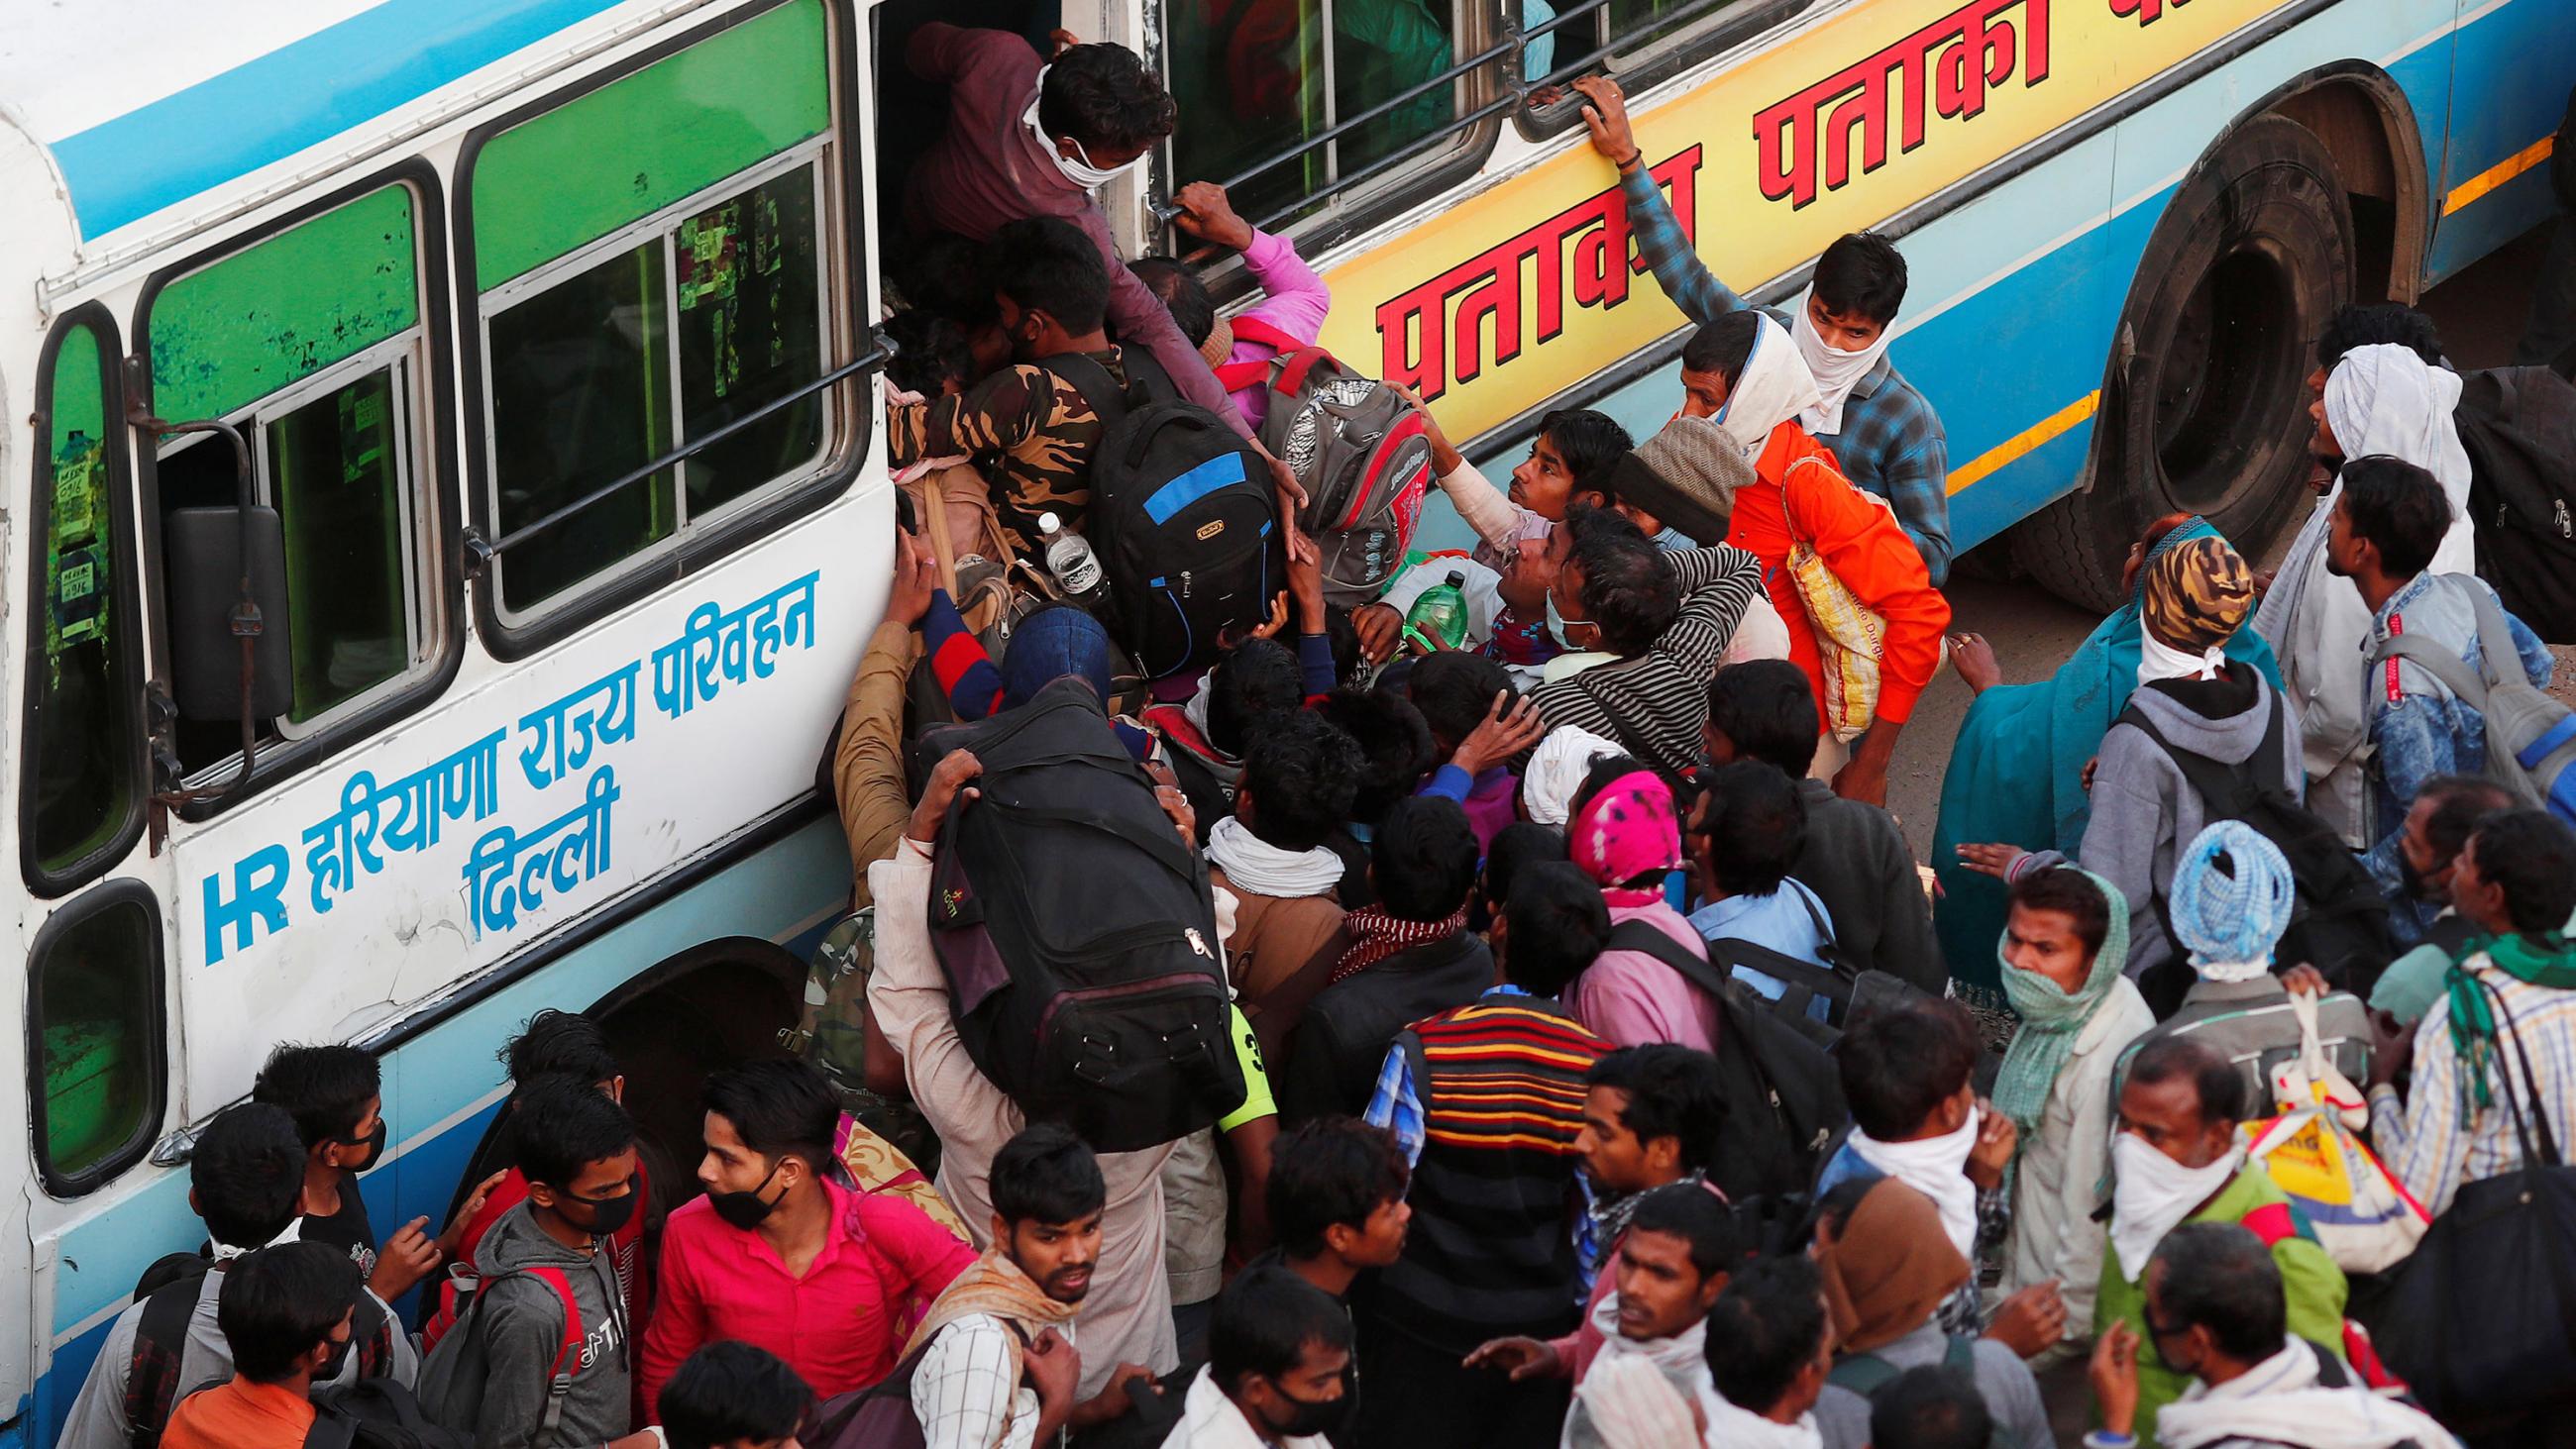 The image shows a huge crowd clamoring to board a bus. 